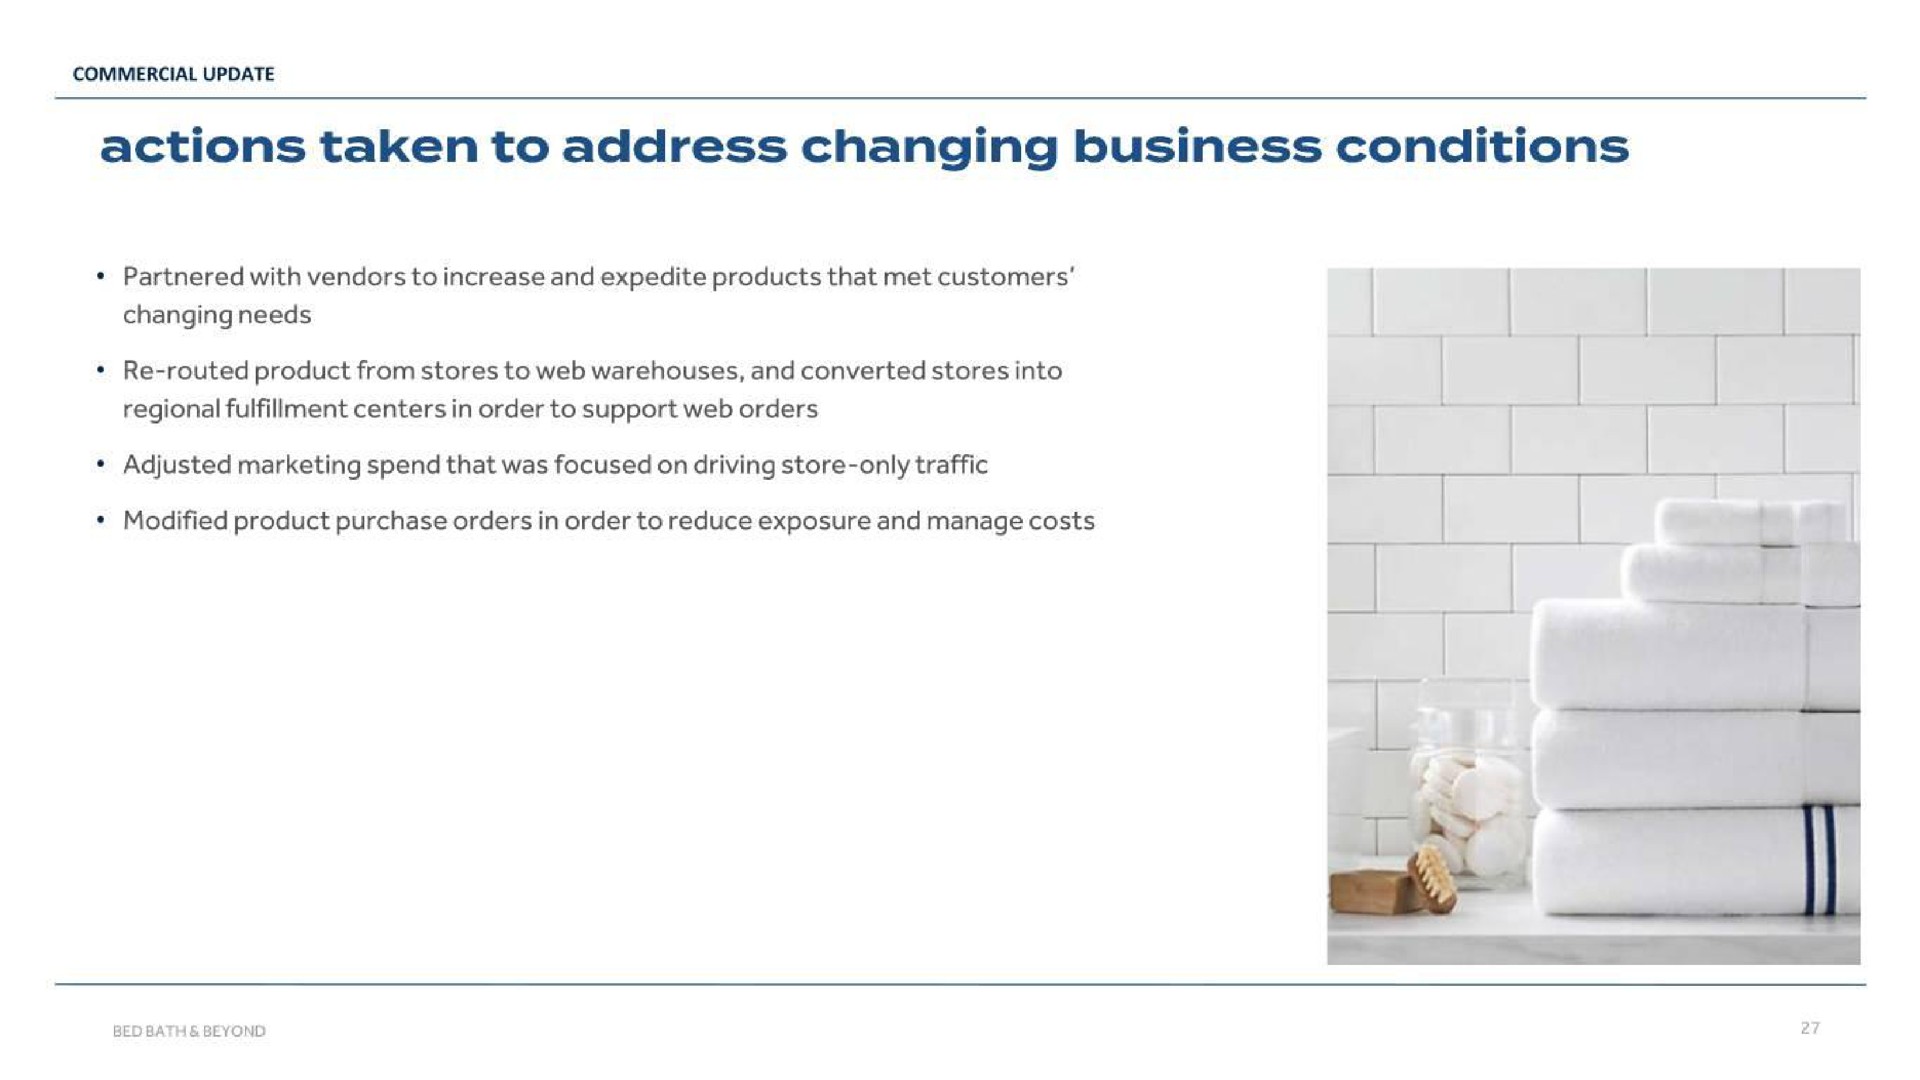 actions taken to address changing business conditions | Bed Bath & Beyond